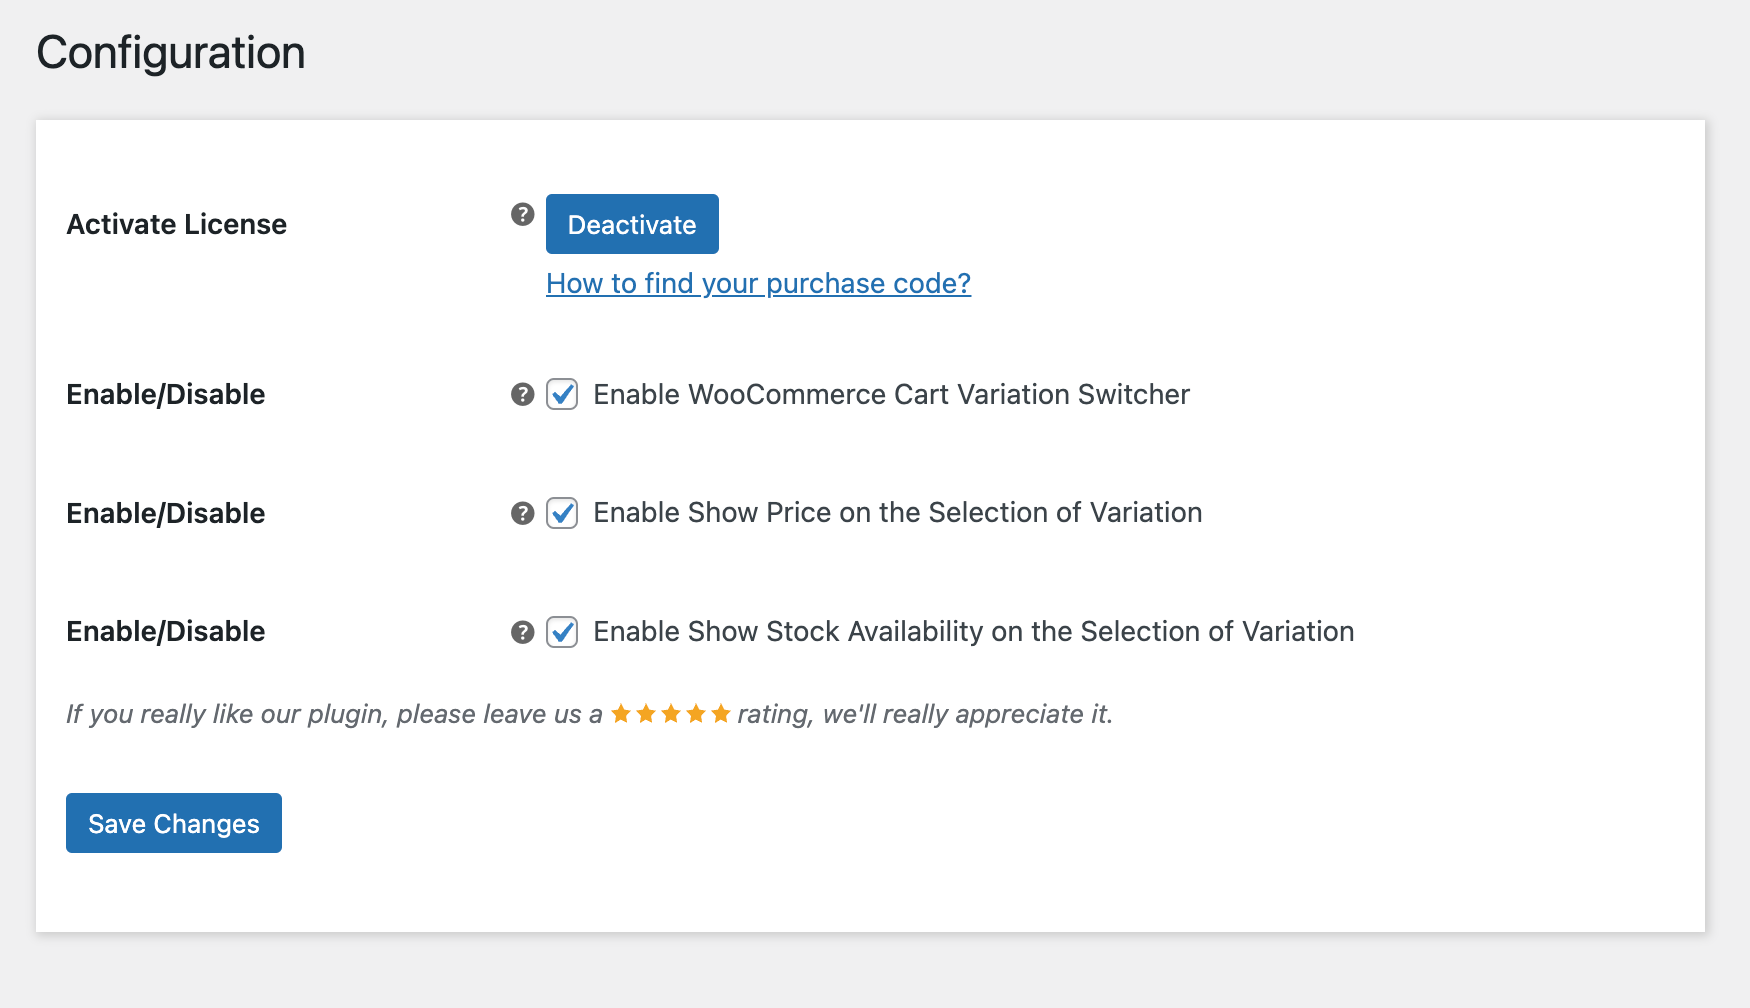 WooCommerce Cart Variation Switcher configuration page